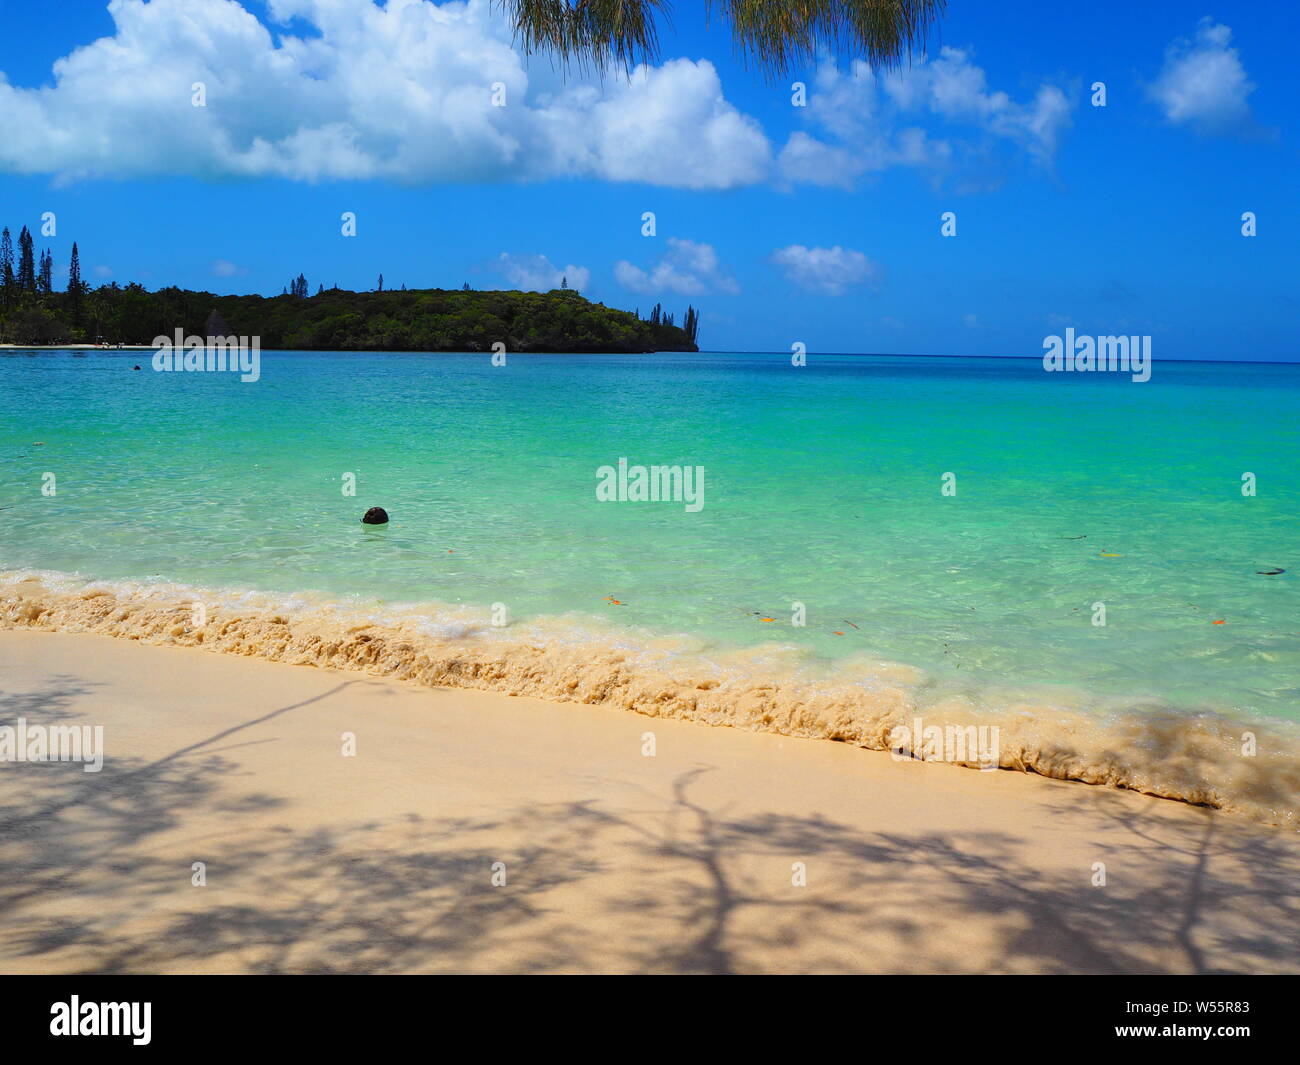 Waves on tropical island beach in the South Seas Stock Photo